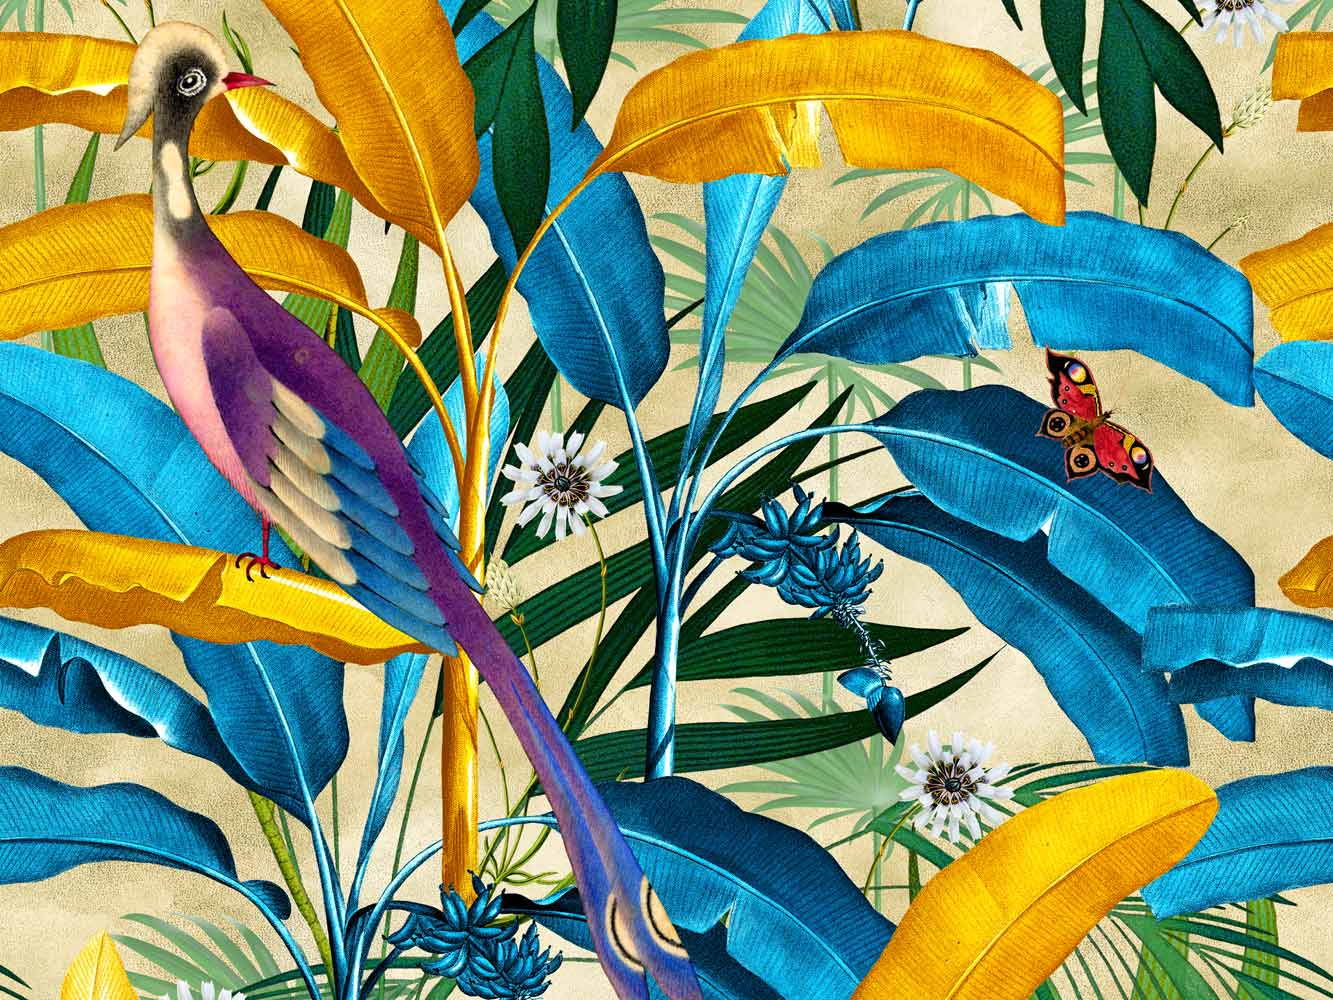 Detail of the Musa wallpaper design with blue and yellow palm trees and exotic bird